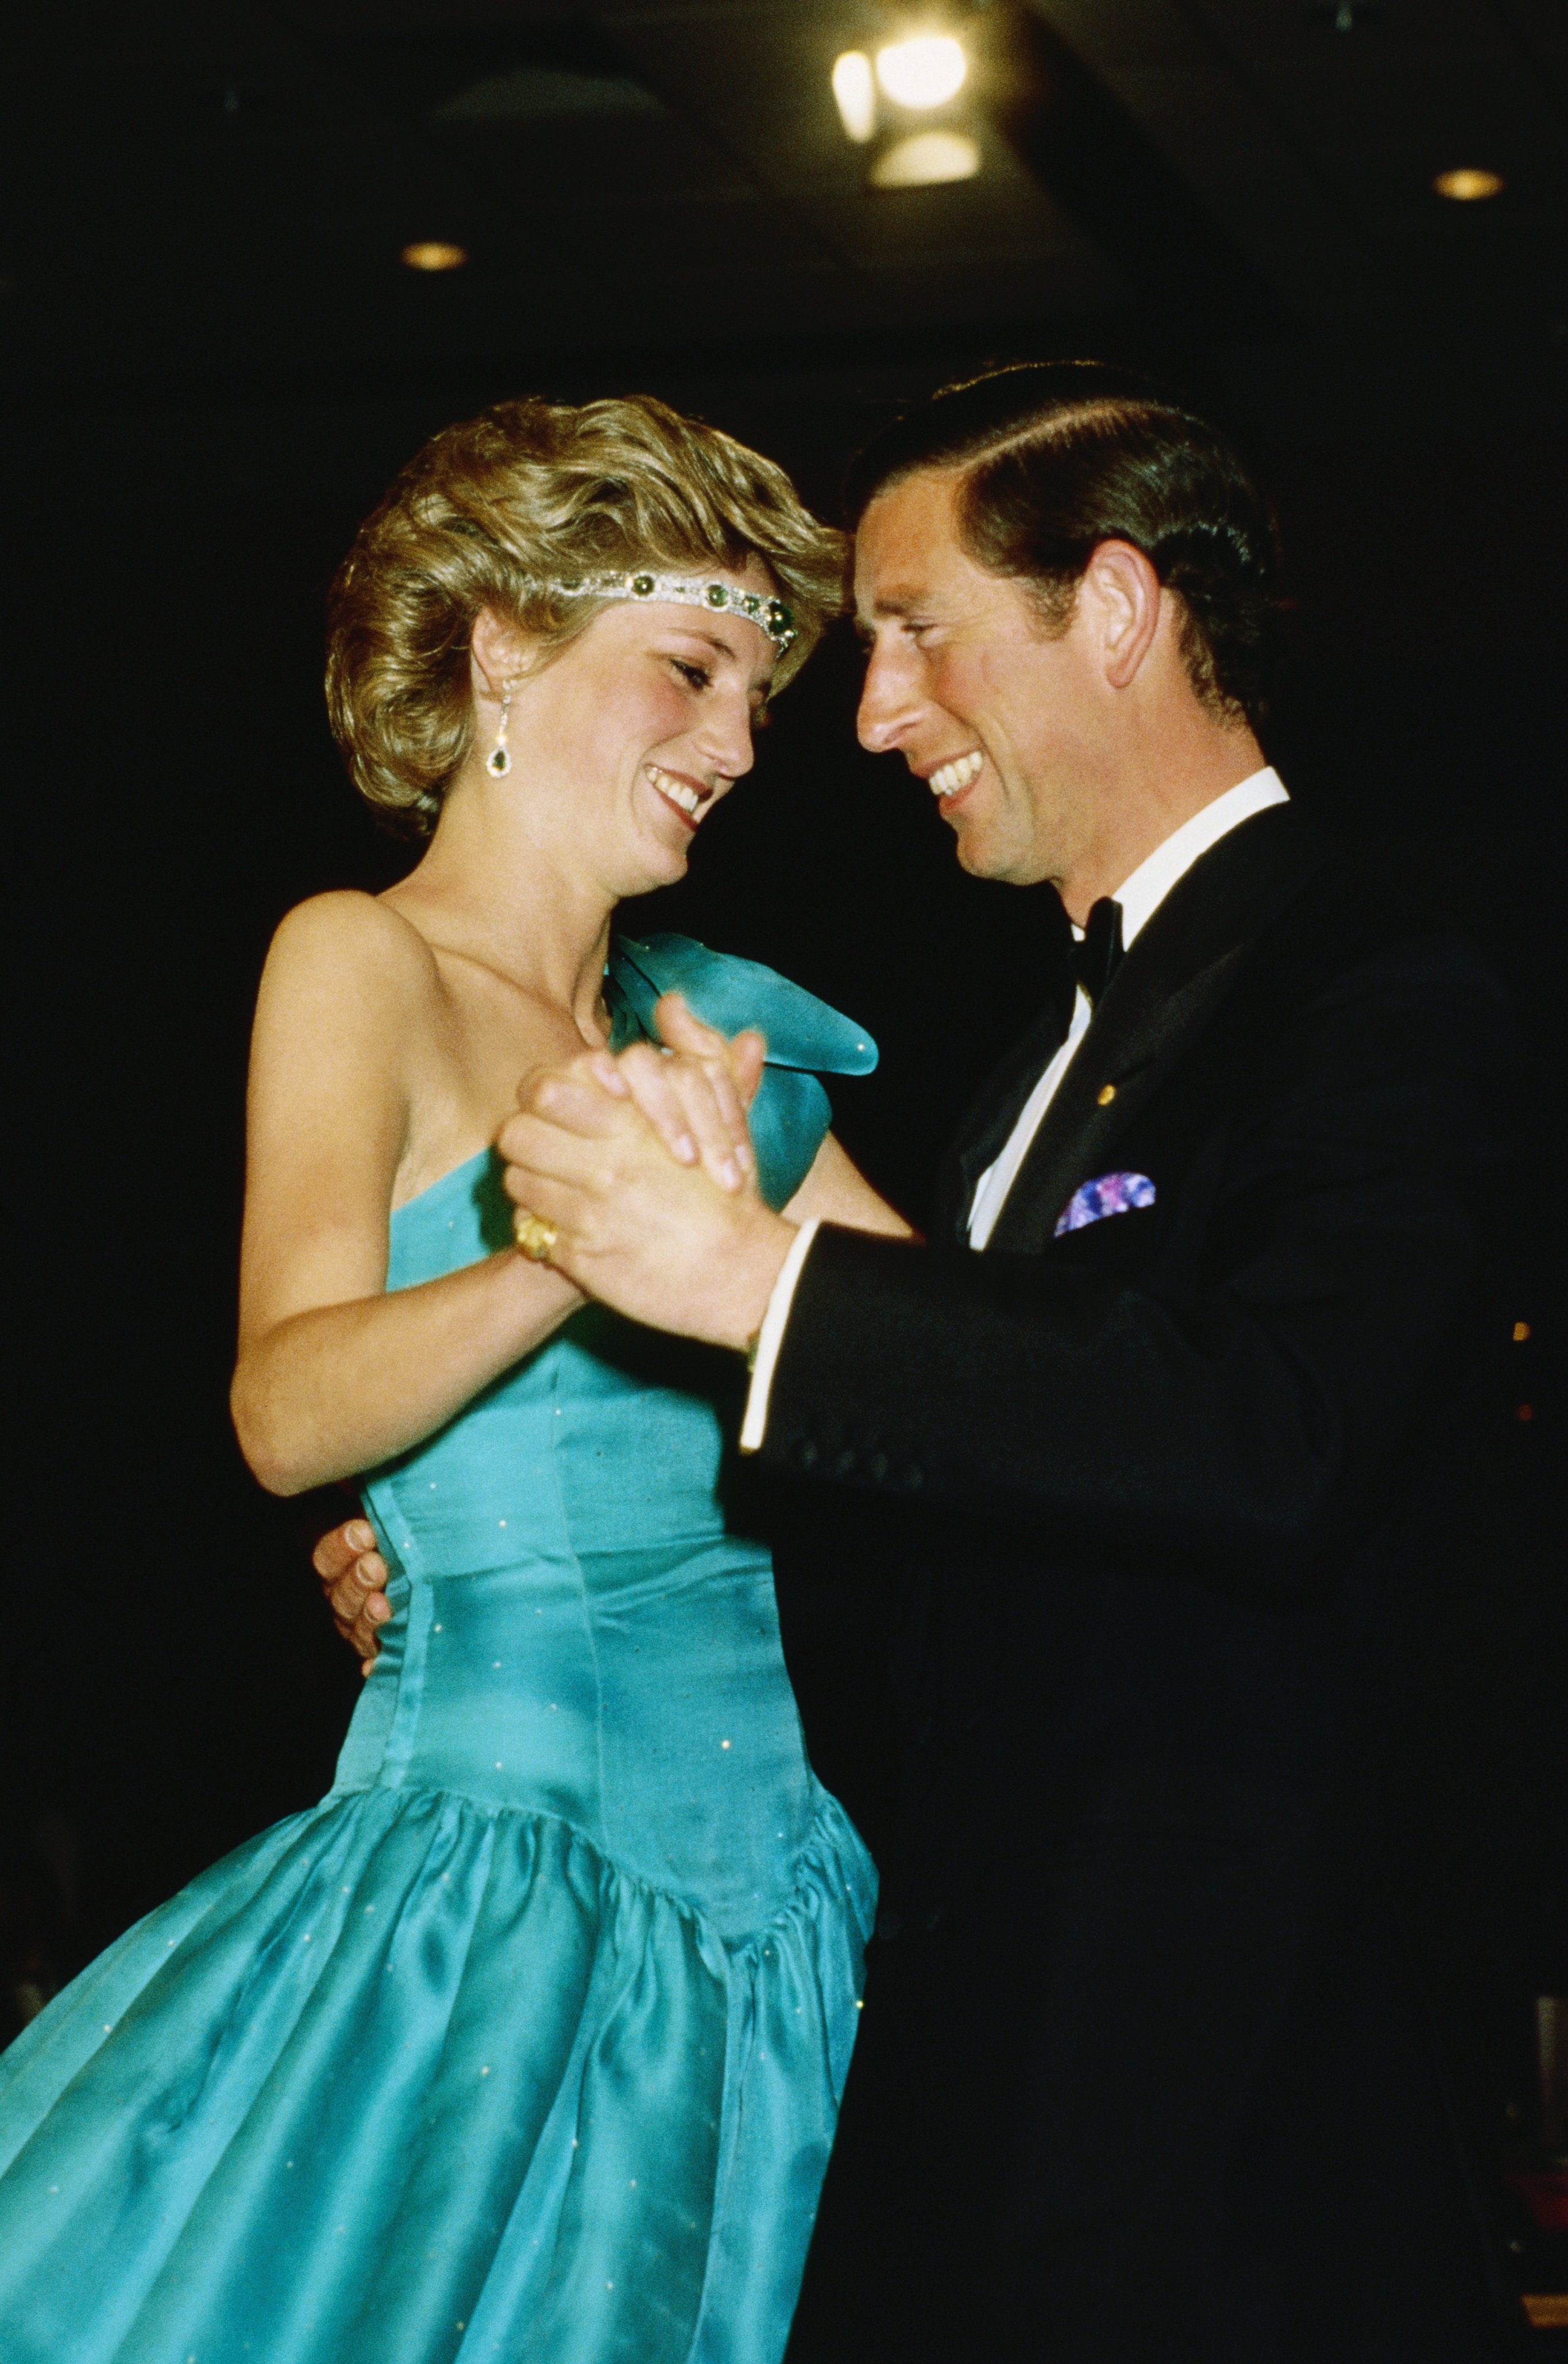 Princess Diana and the Prince of Wales, Charles, all smiles while dancing at a formal event | Photo: Getty Images